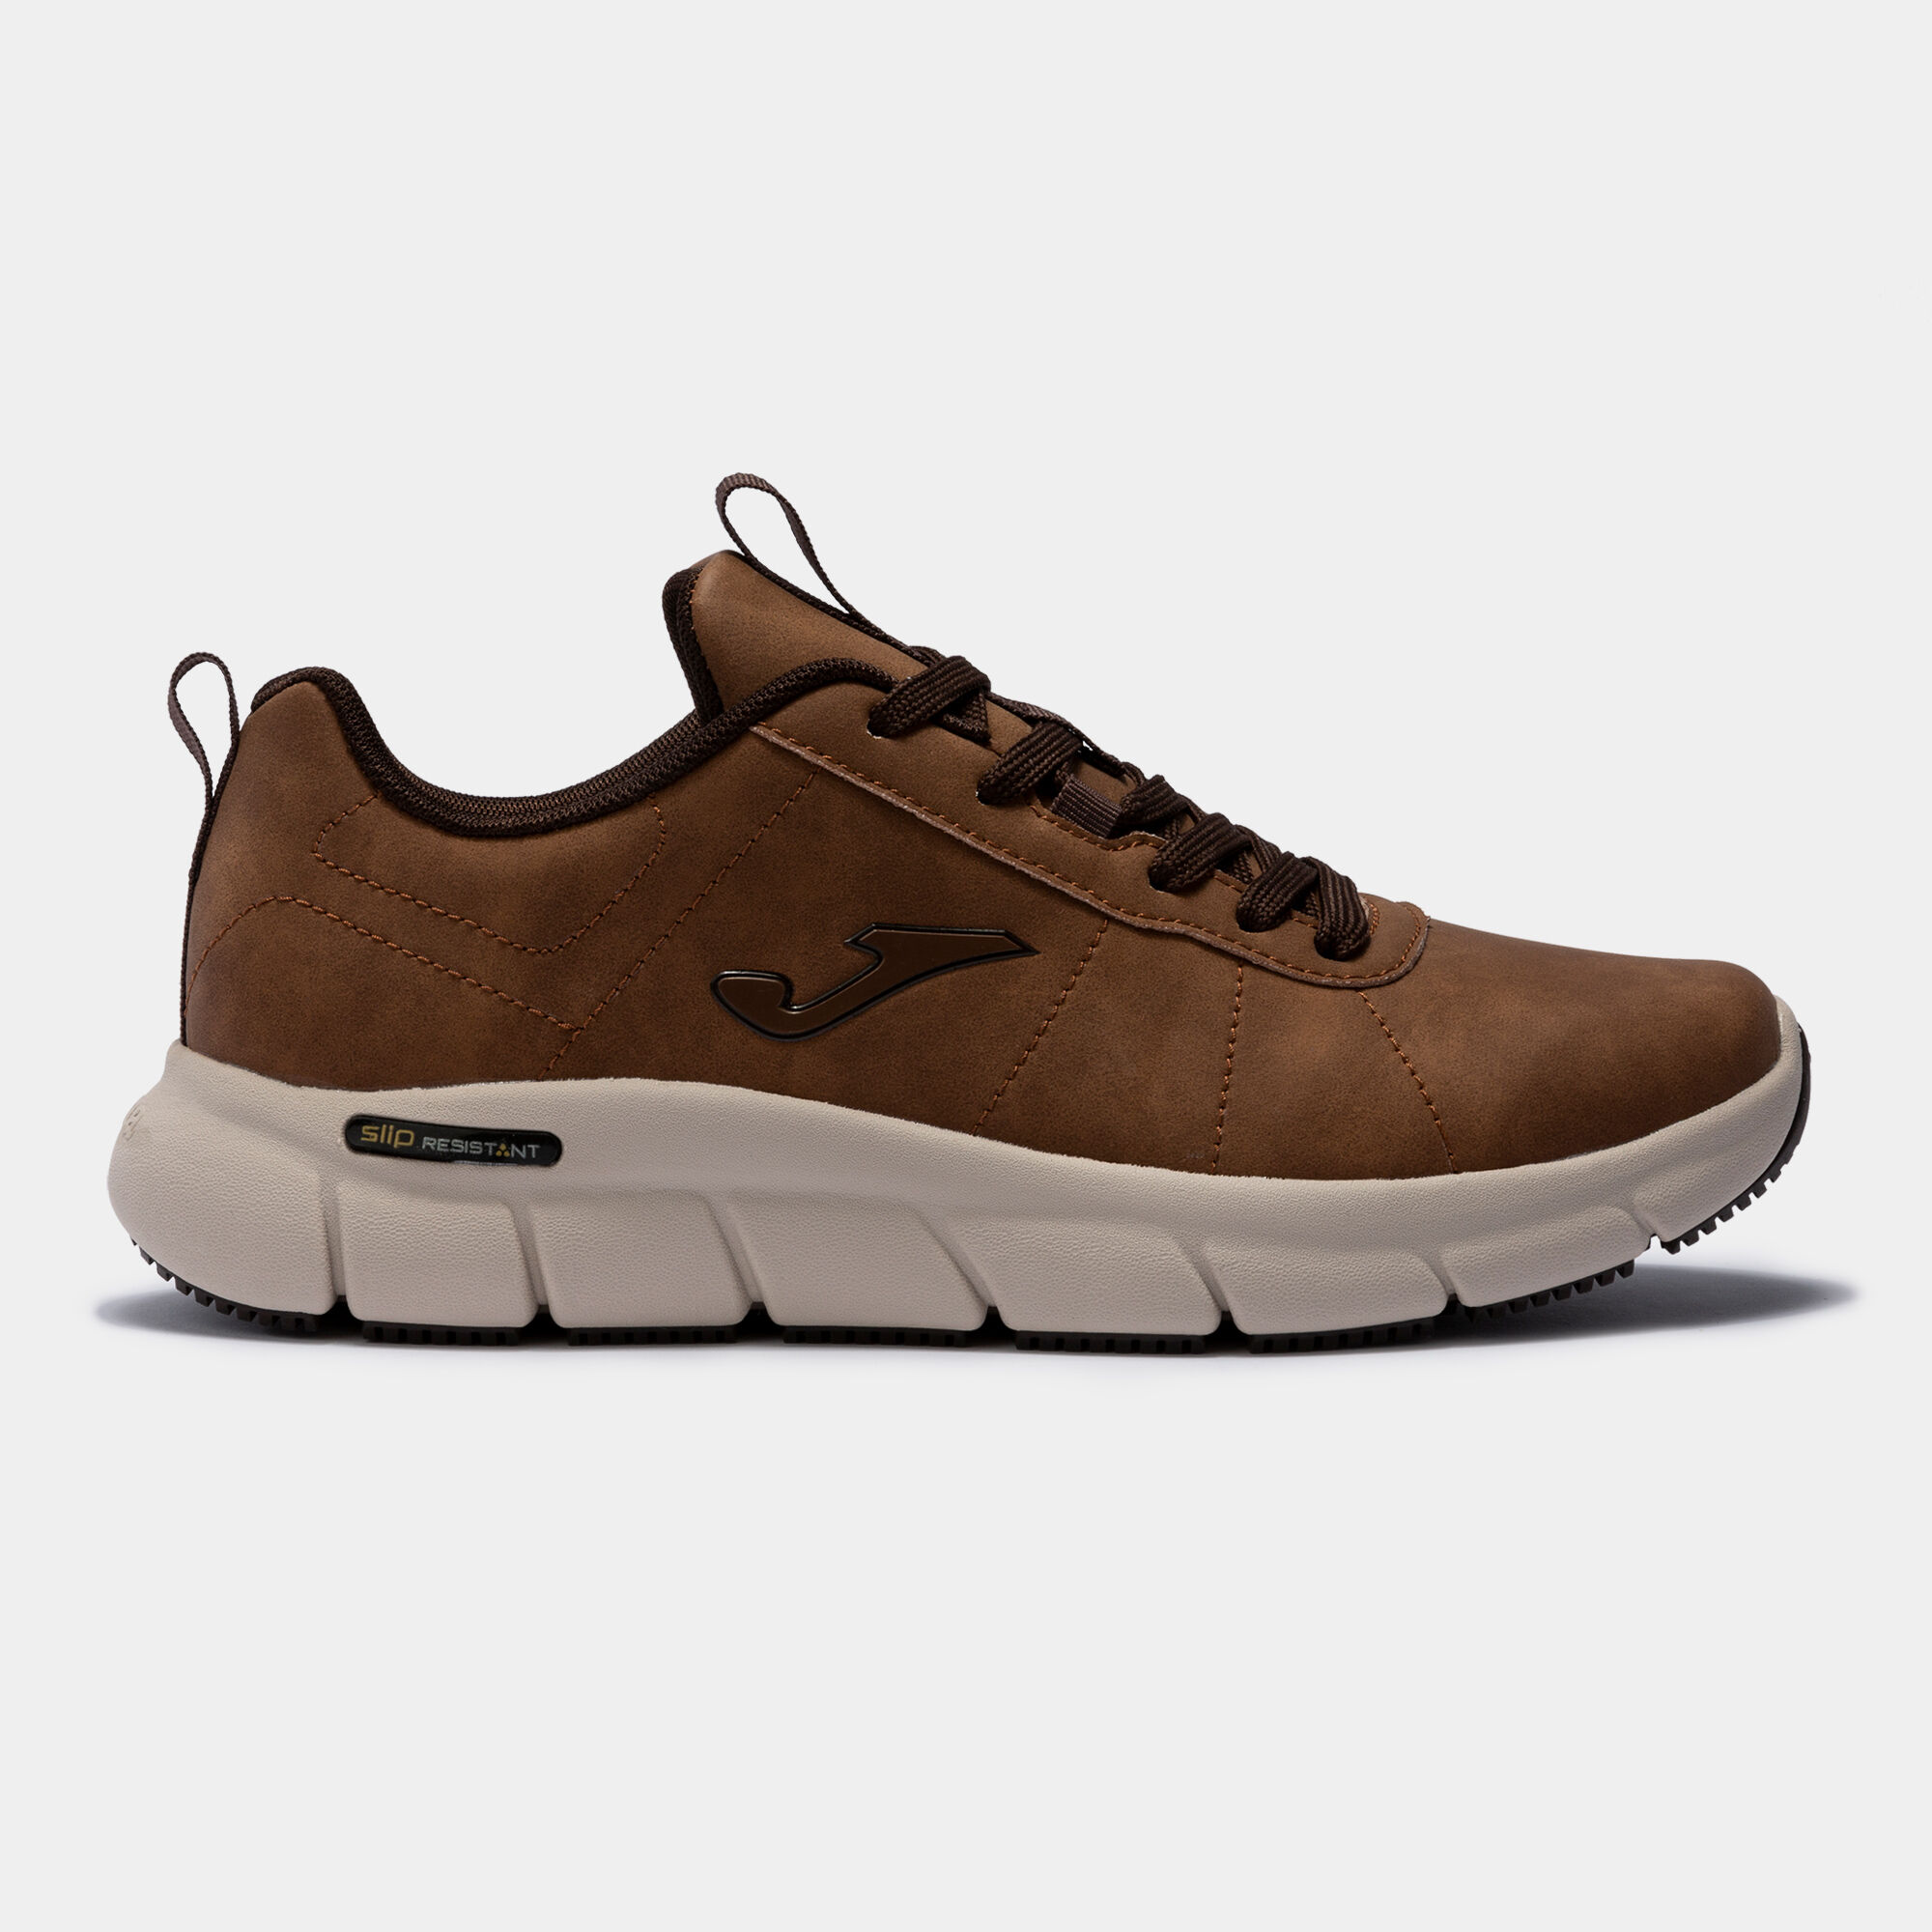 CHAUSSURES CASUAL DAILY 22 HOMME CAMEL